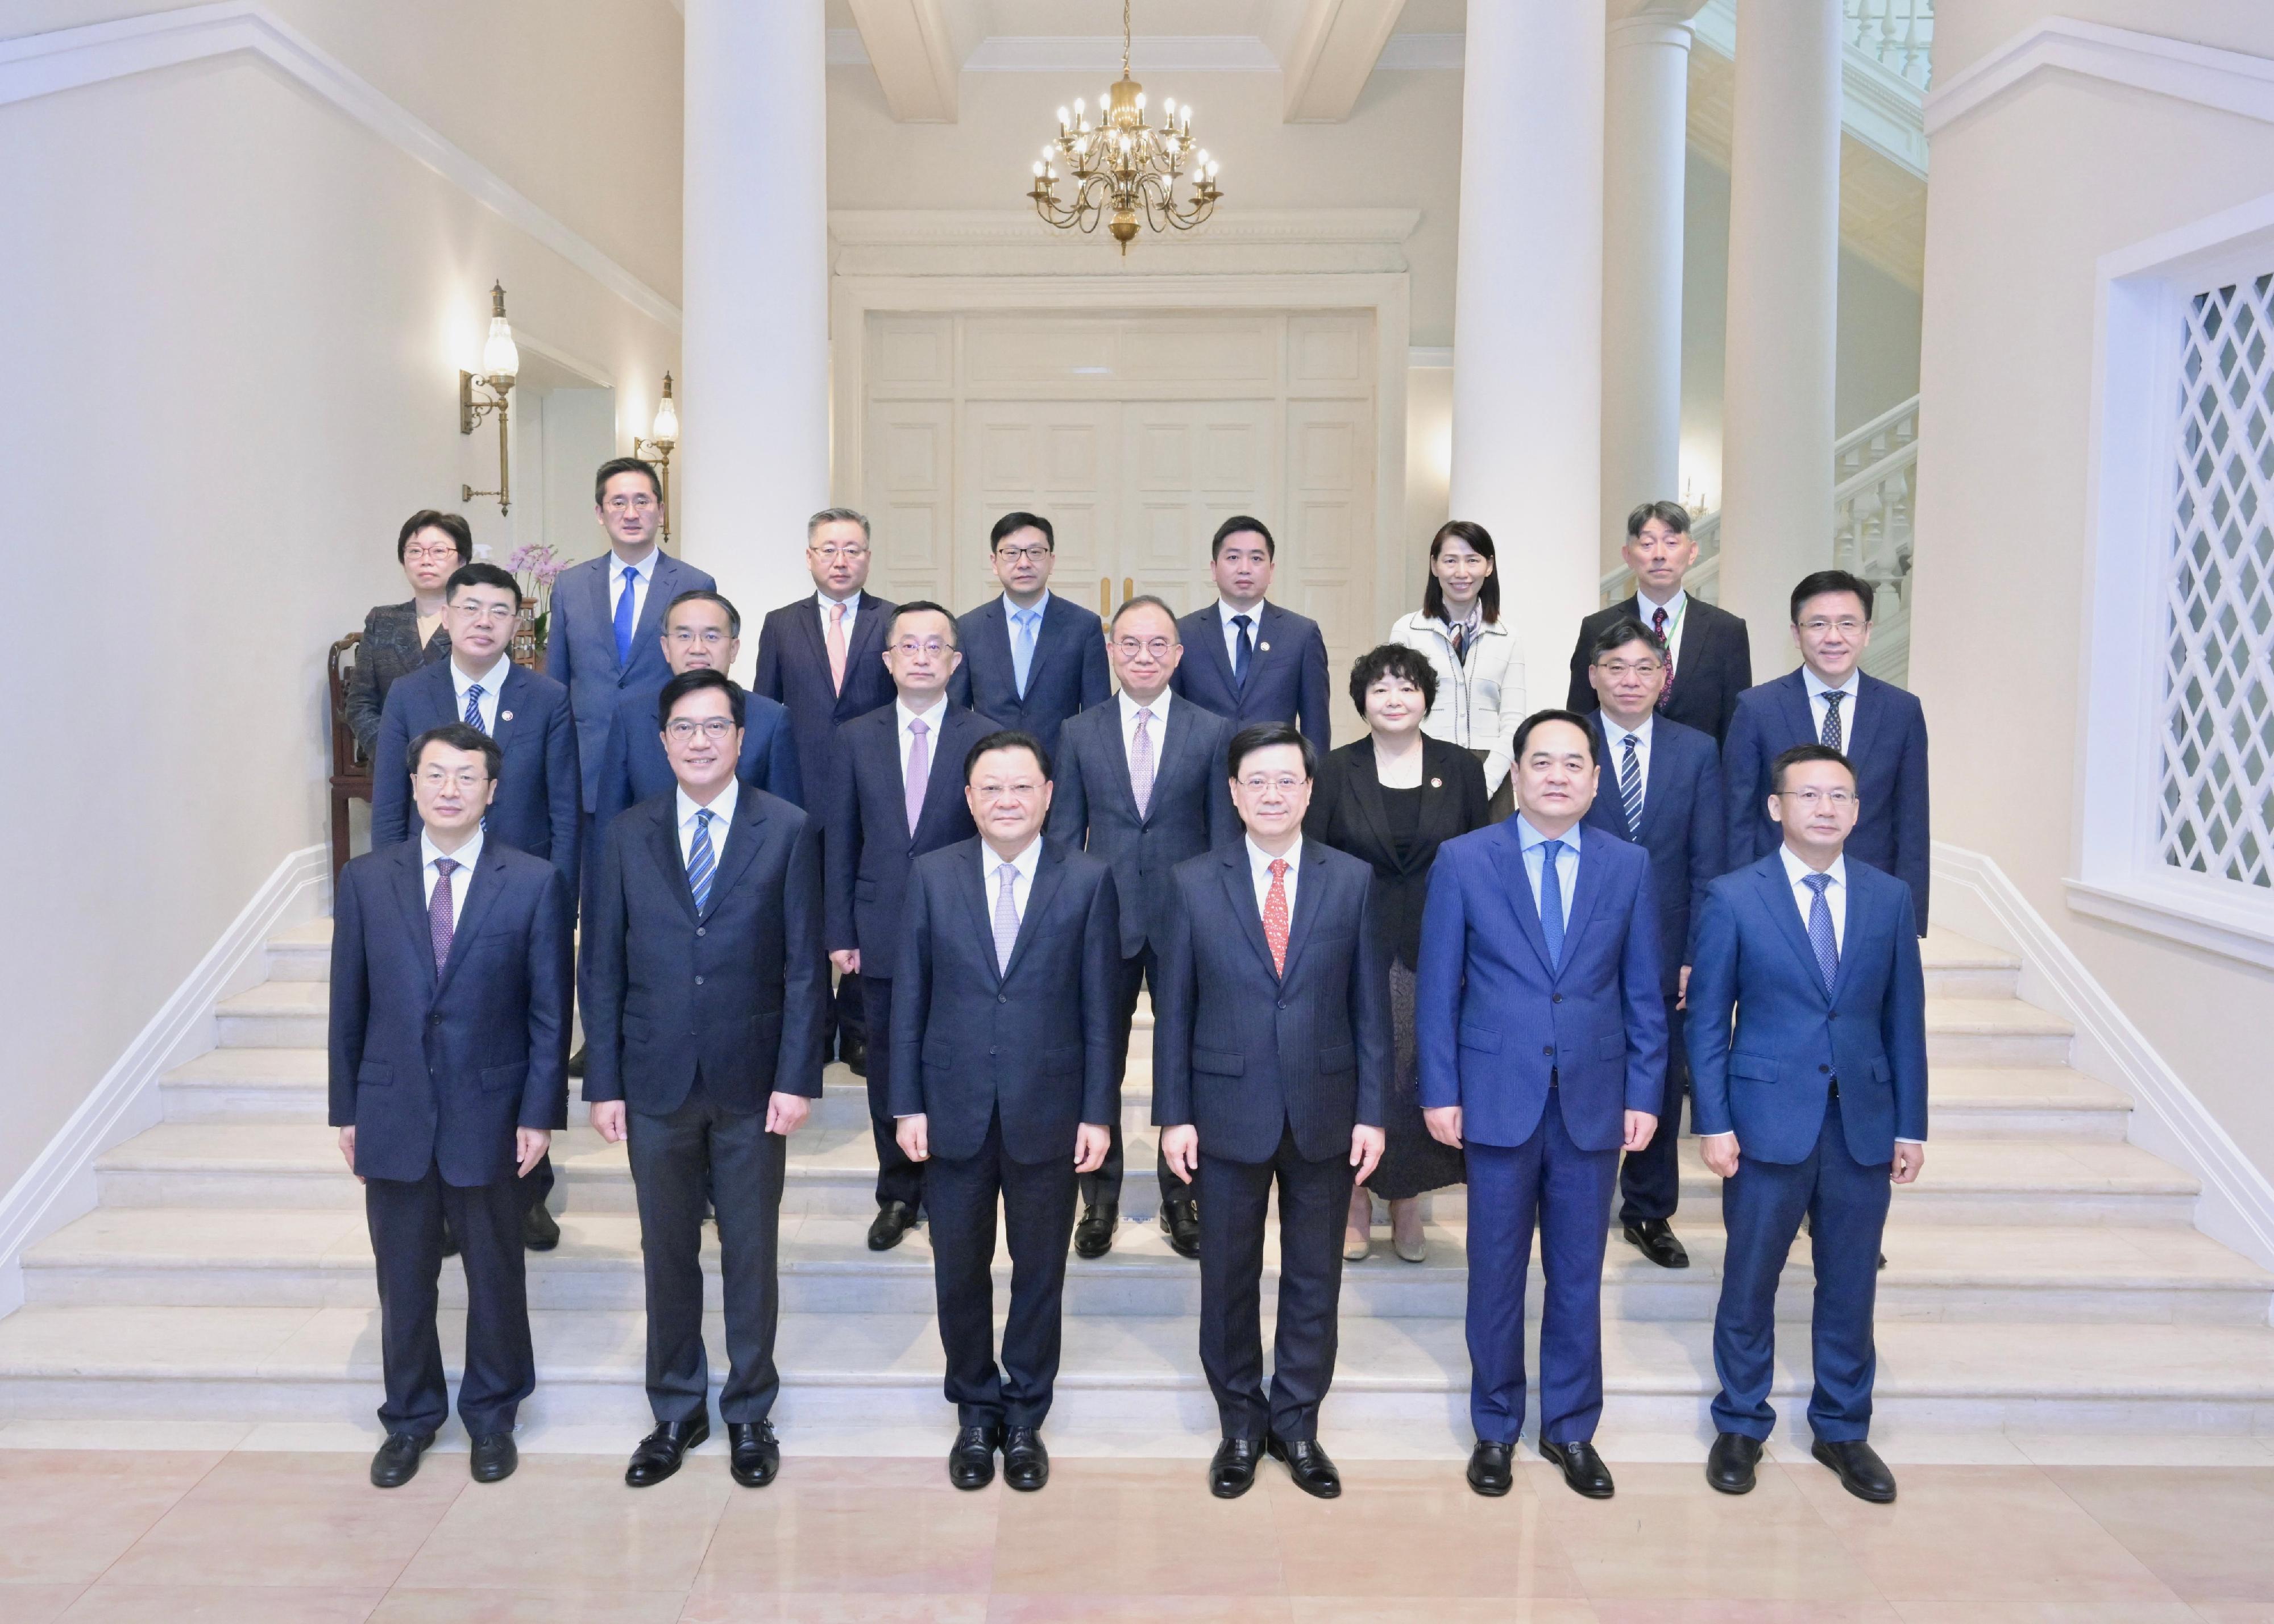 The Chief Executive, Mr John Lee, hosted a lunch at Government House for the visiting delegation of Guangdong Province attending the 23rd Plenary of Hong Kong/Guangdong Co-operation Joint Conference today (March 21). Photo shows Mr Lee (first row, third right); the Governor of Guangdong Province, Mr Wang Weizhong (first row, third left); Deputy Director of the Hong Kong and Macao Affairs Office of the State Council Mr Yang Wanming (first row, second right); the Deputy Financial Secretary, Mr Michael Wong (first row, second left); the Secretary for Constitutional and Mainland Affairs, Mr Erick Tsang Kwok-wai (second row, centre); the Secretary for Financial Services and the Treasury, Mr Christopher Hui (second row, second left); the Secretary for Transport and Logistics, Mr Lam Sai-hung (second row, second right); the Secretary for Innovation, Technology and Industry, Professor Sun Dong (second row, first right); the Secretary for Labour and Welfare, Mr Chris Sun (third row, fourth left), and other representatives of the Hong Kong Special Administrative Region Government and Guangdong Province delegation members at Government House.

